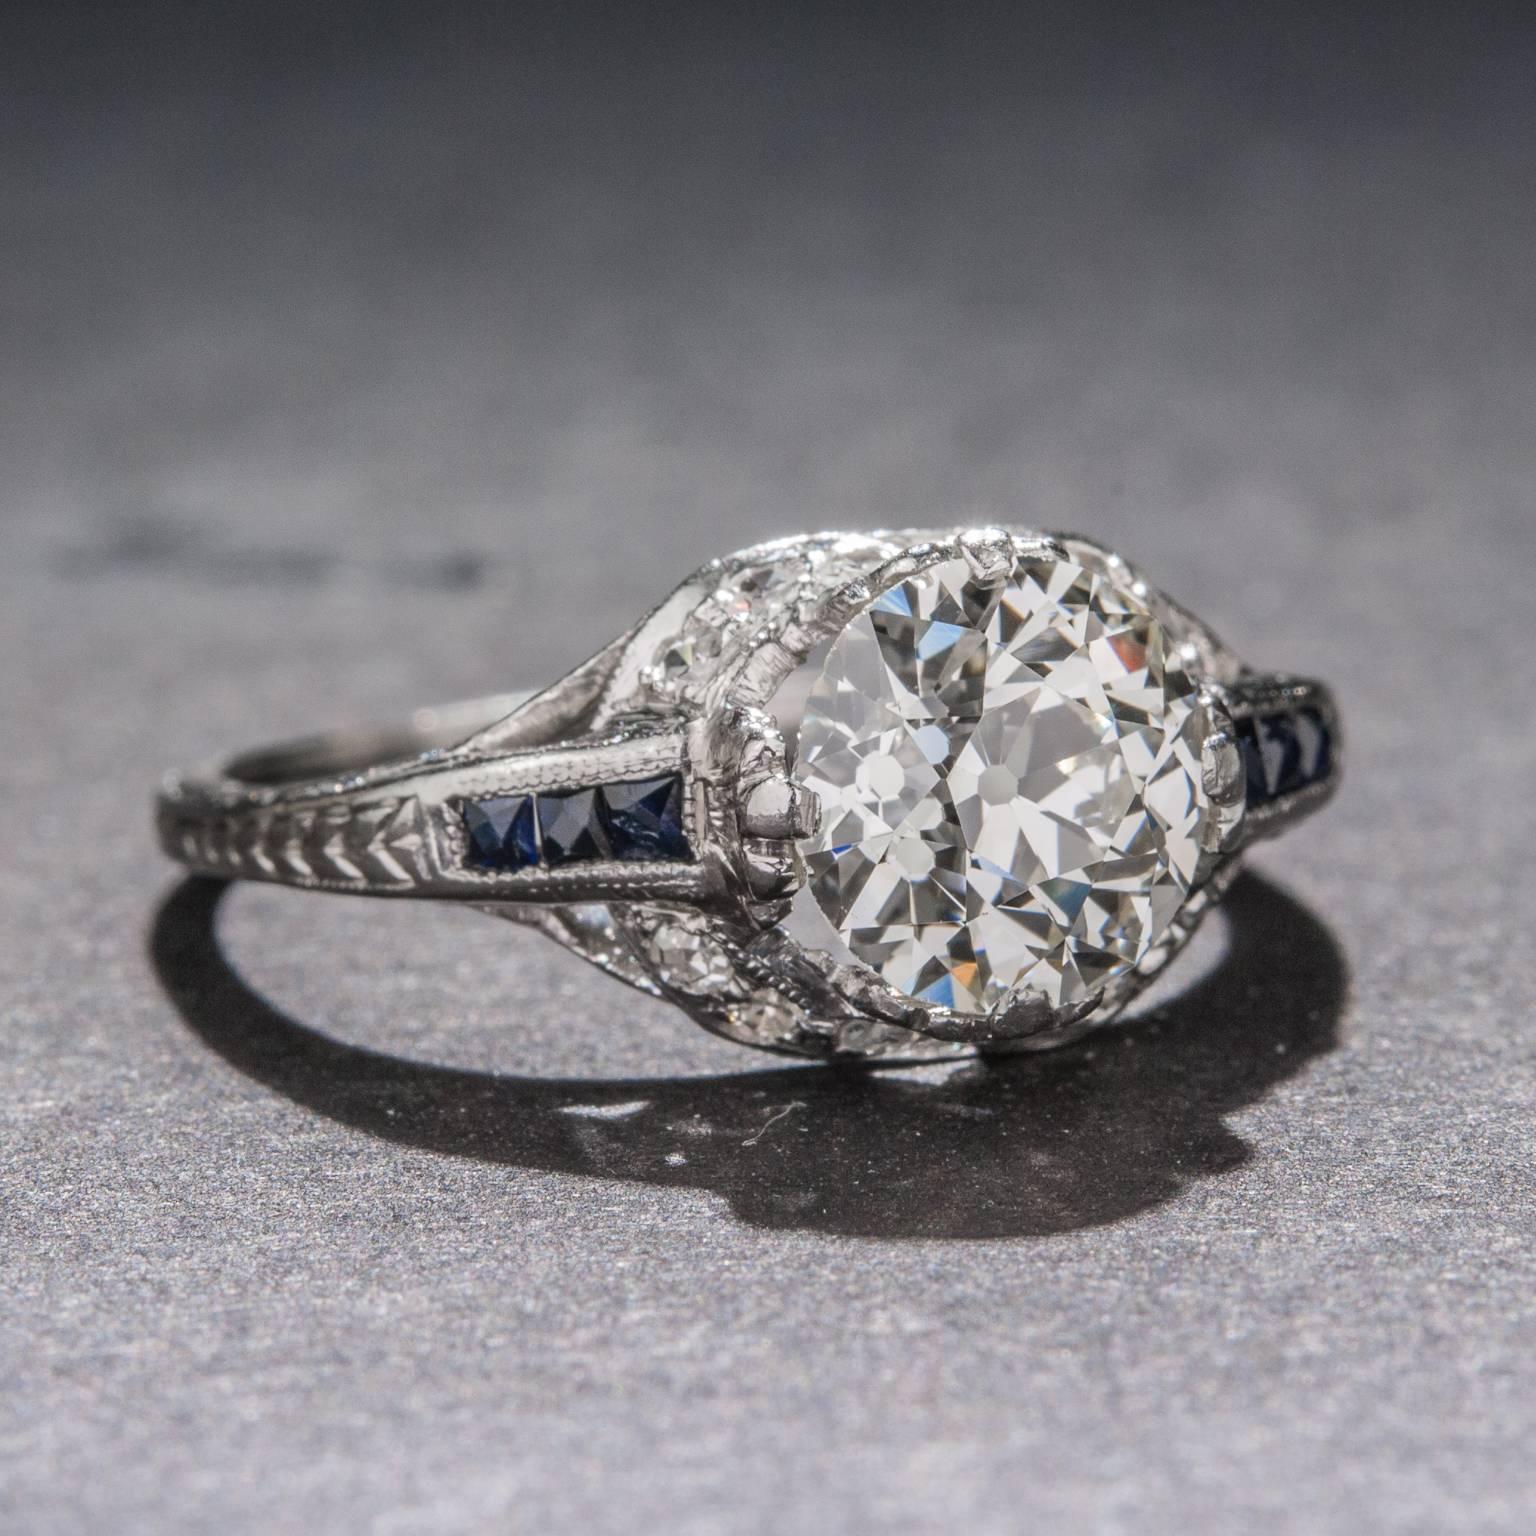 An elegant Art Deco ring with a beautifully crafted and elaborately detailed platinum setting. The Old European cut center diamond weighs 1.44 carats and has a channel of sapphire on each side. This ring is currently size 6.75.
